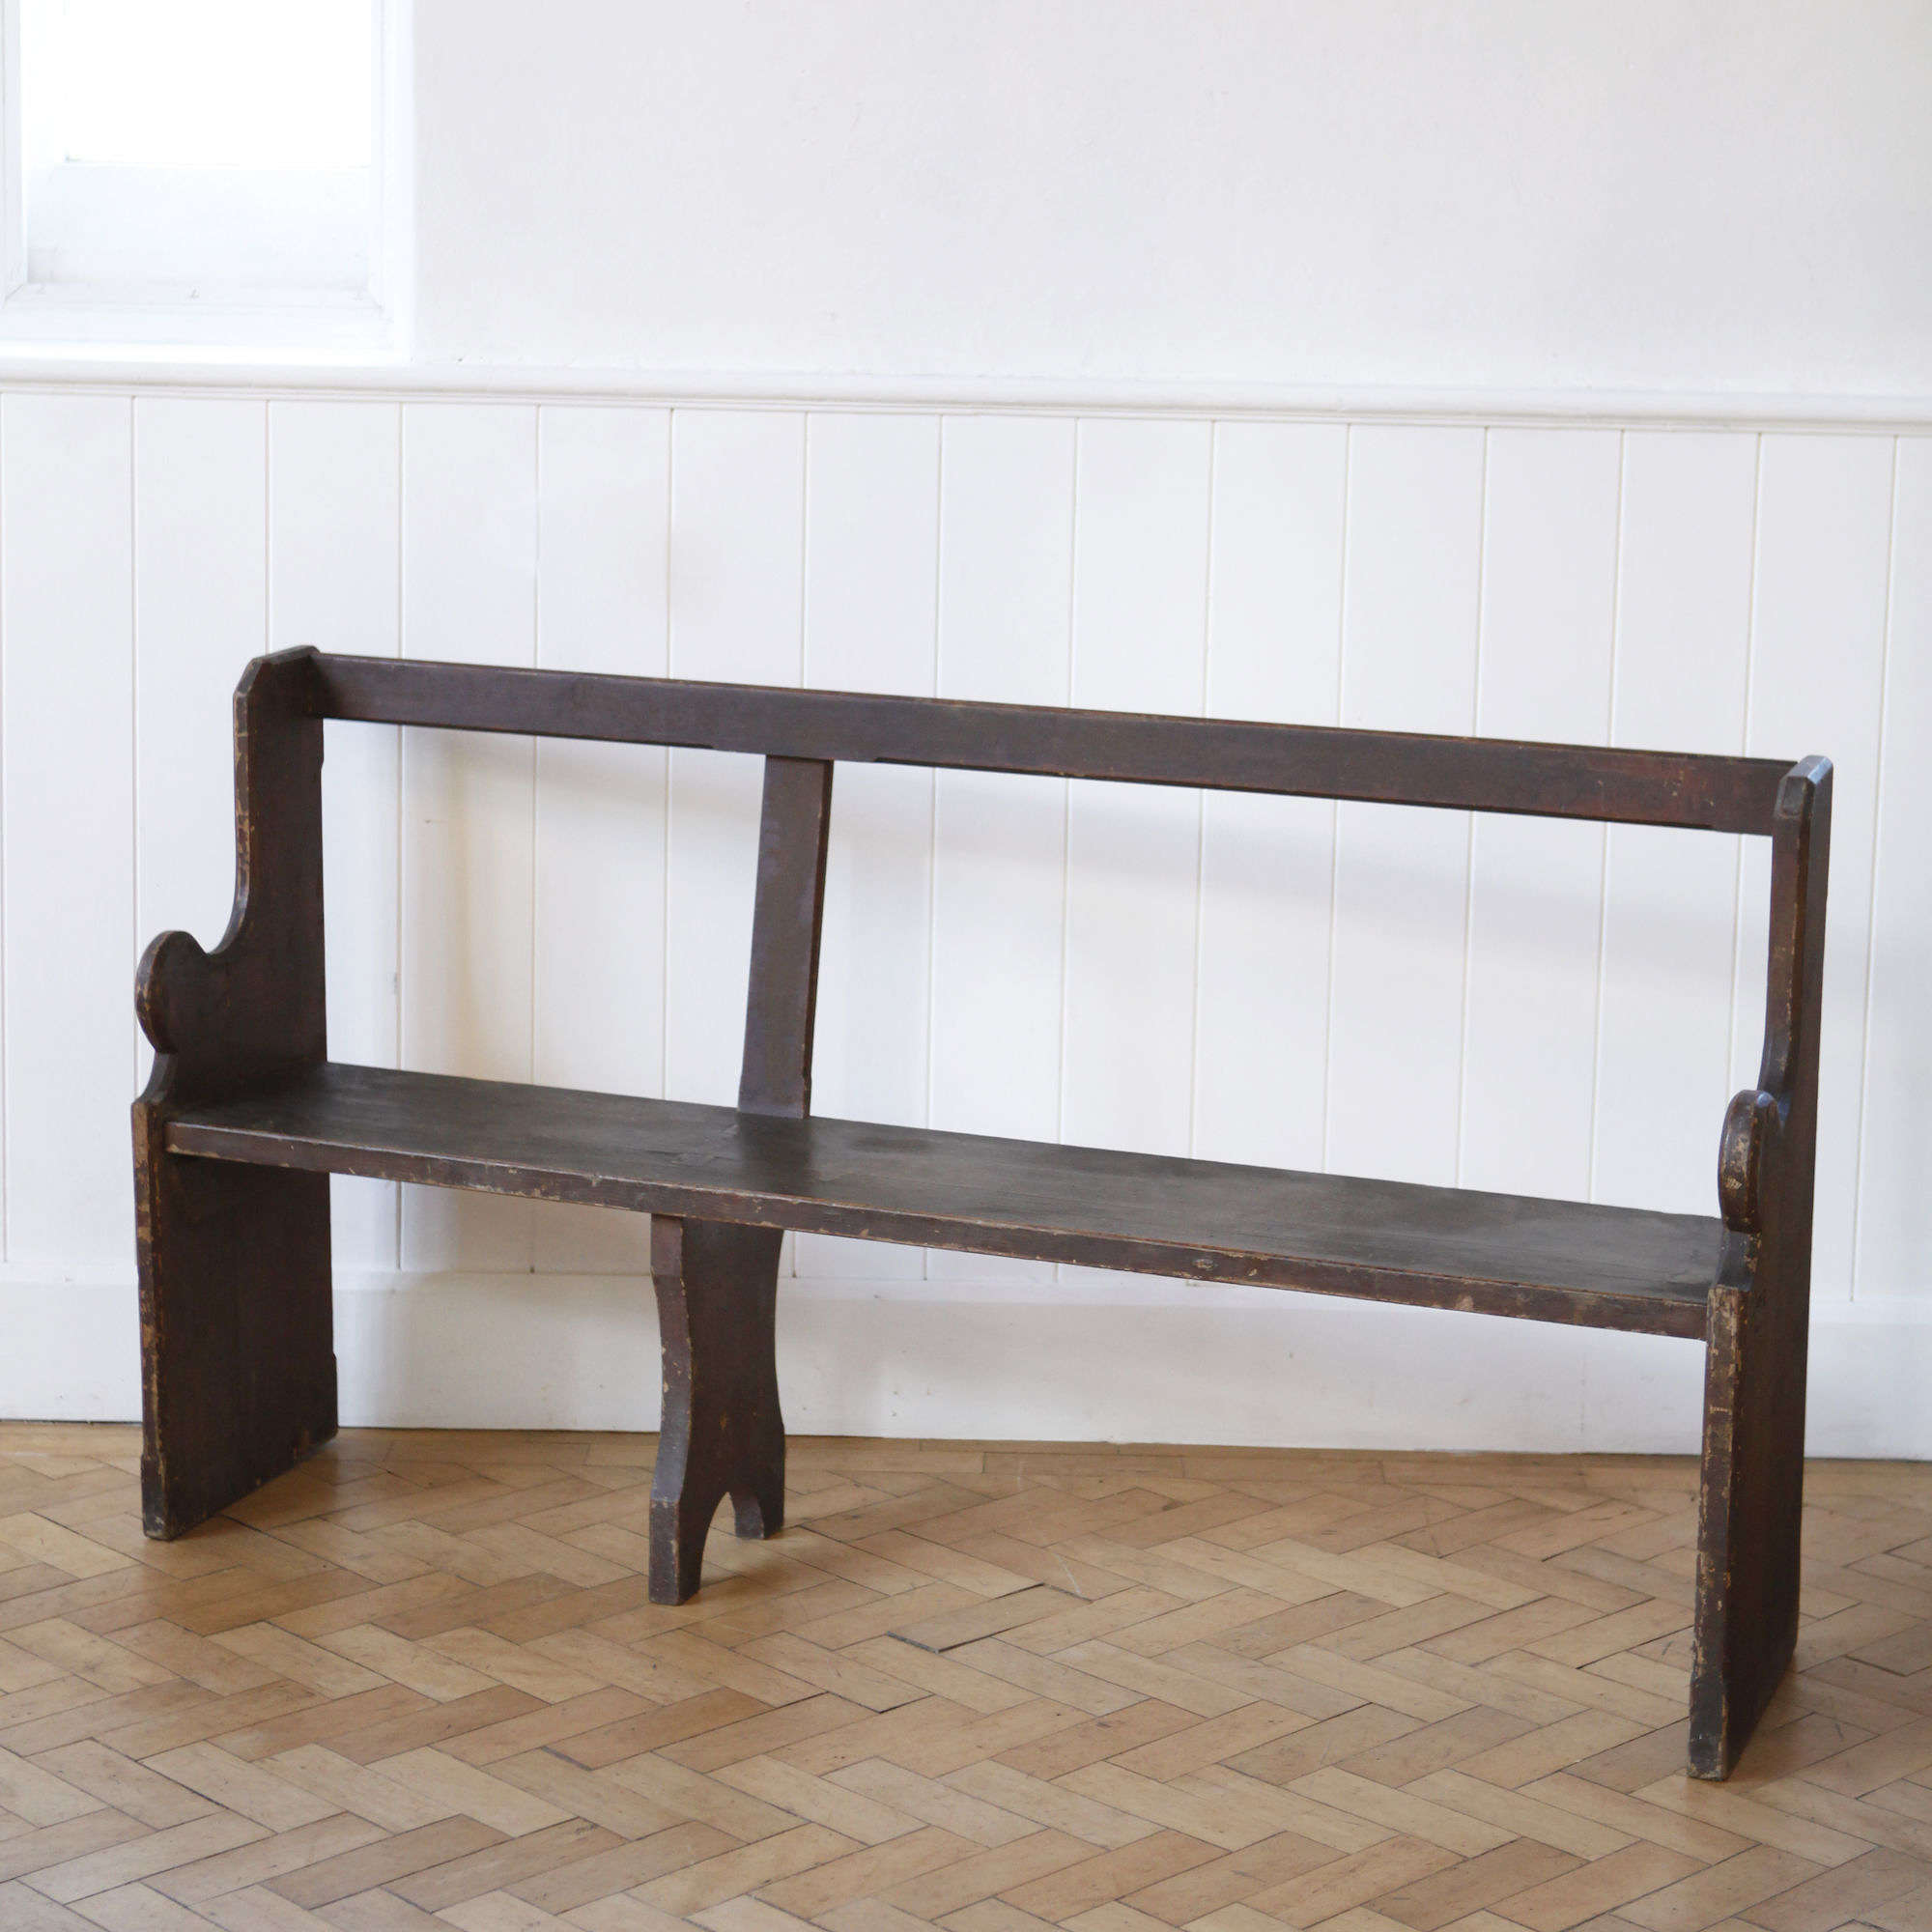 Original an untouched grain painted hall bench settle.